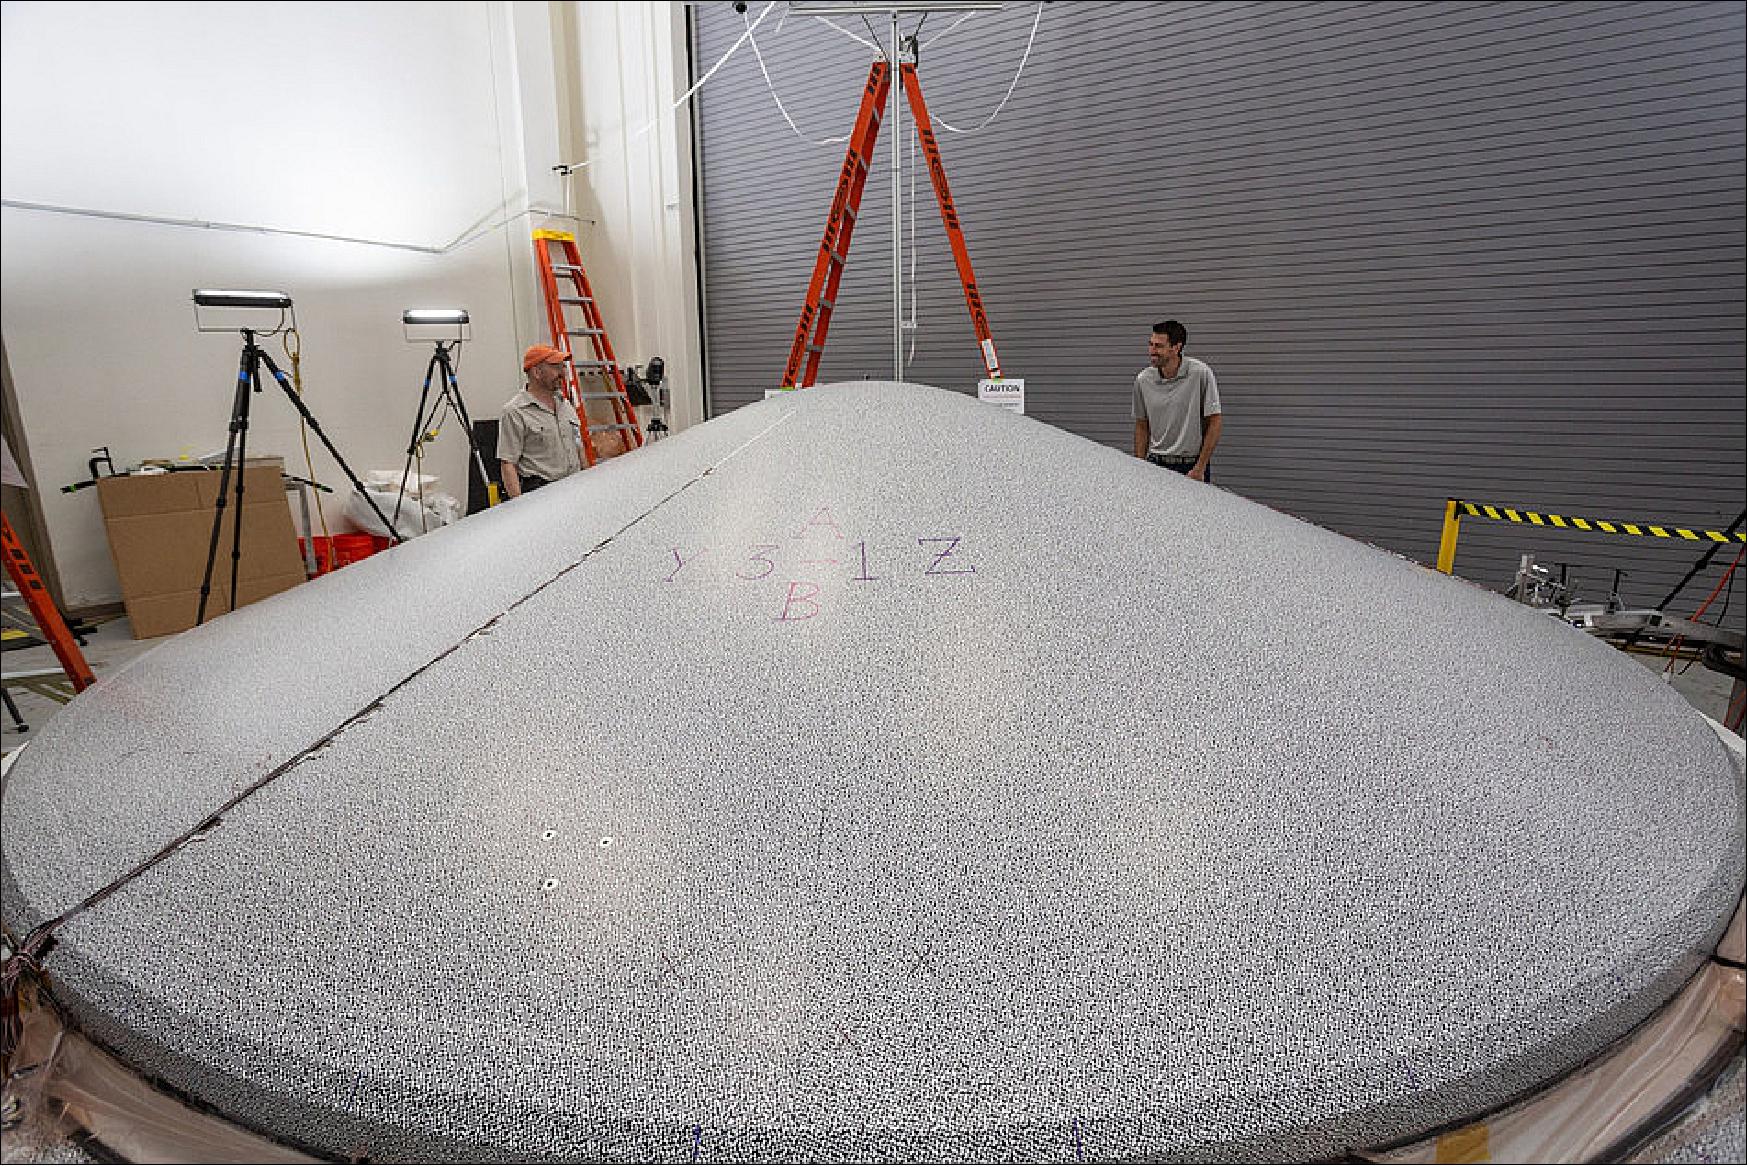 Figure 12: The Lockheed Martin-built heat shield, shown here in the testing phase, is just one component in the final aeroshell that will protect the Mars 2020 rover on its long journey to Mars (image credit: Lockheed Martin)